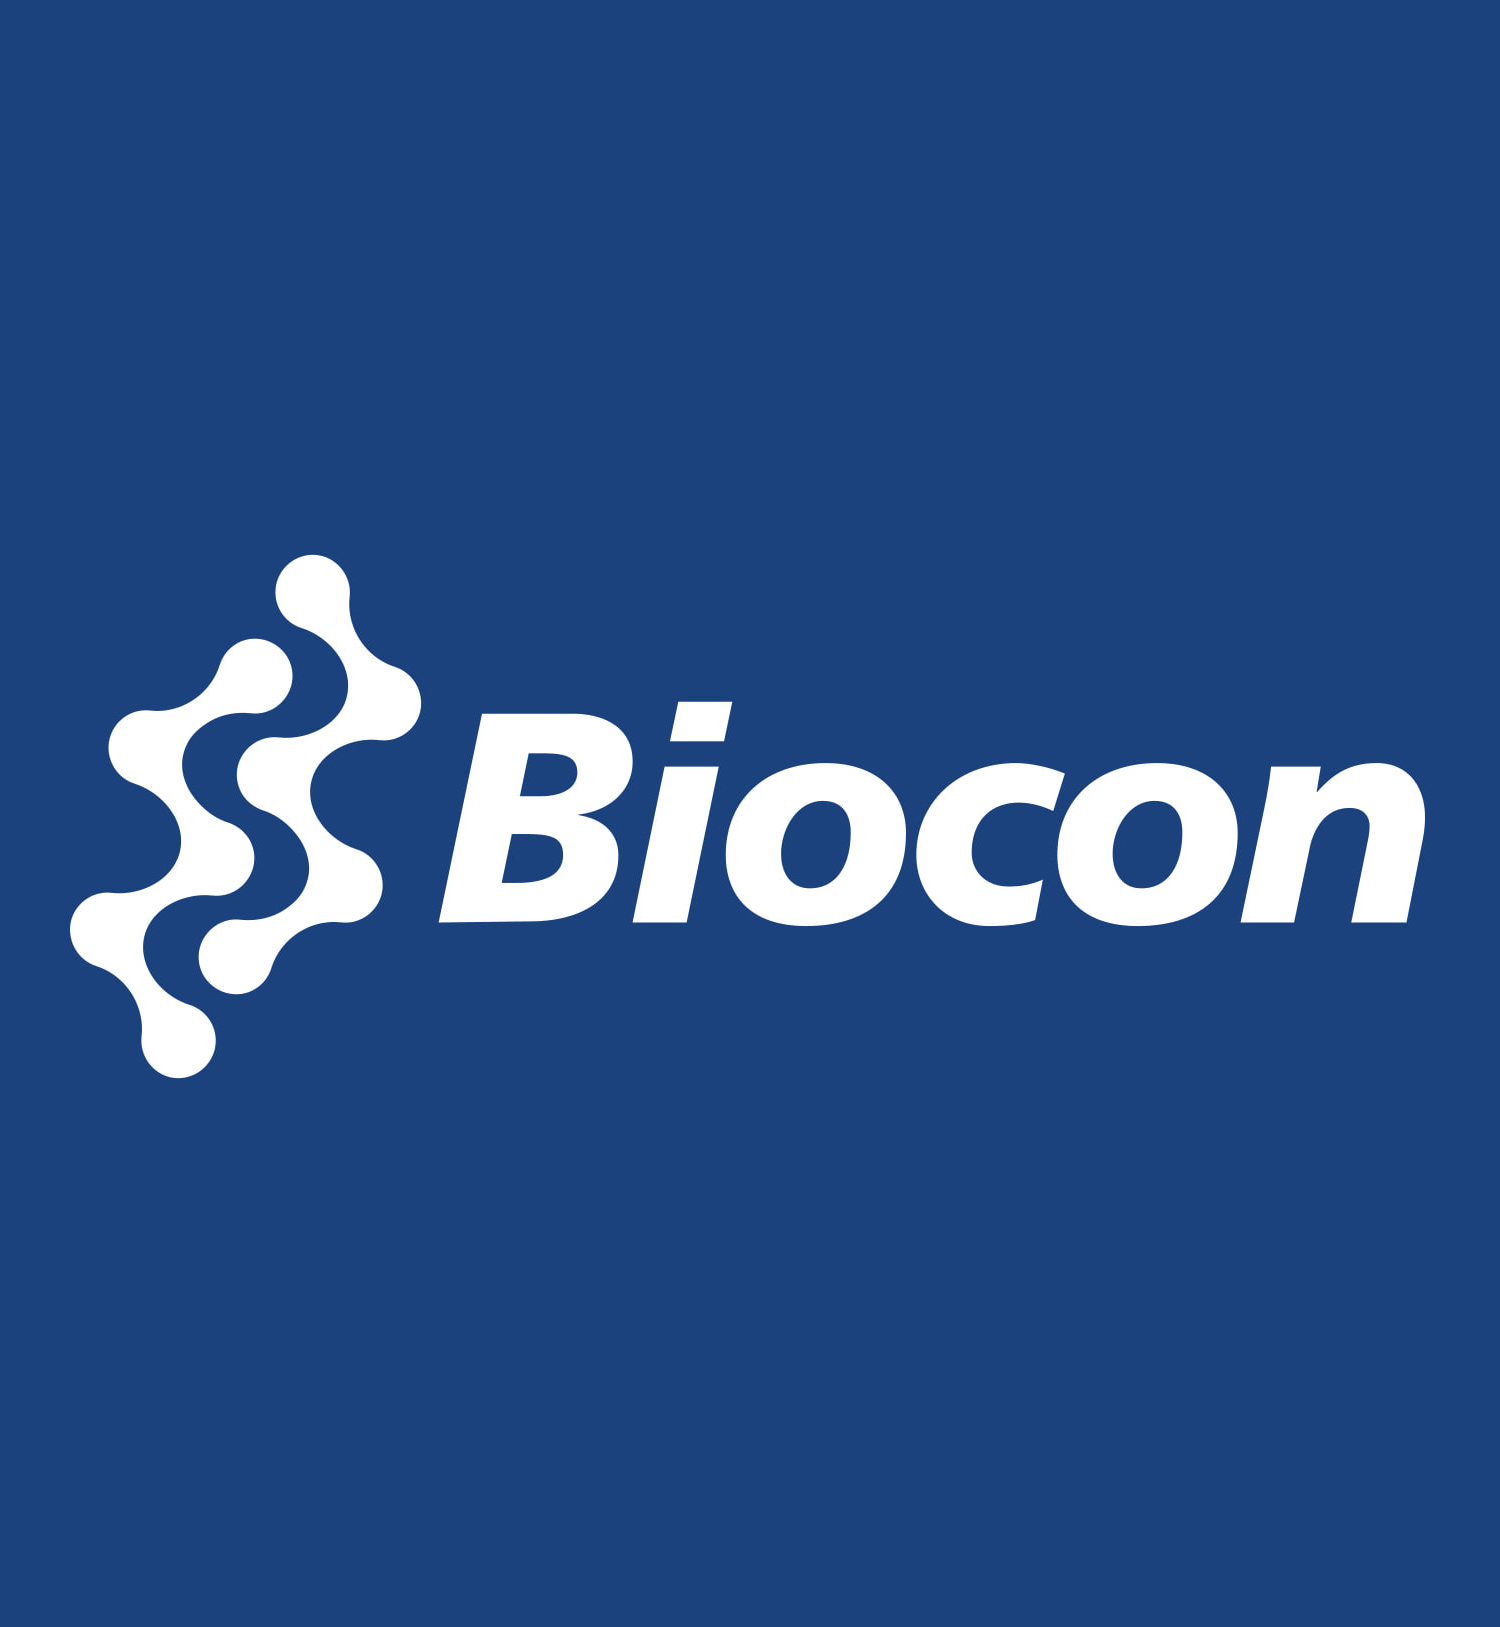 Why Biocon Share Is Falling